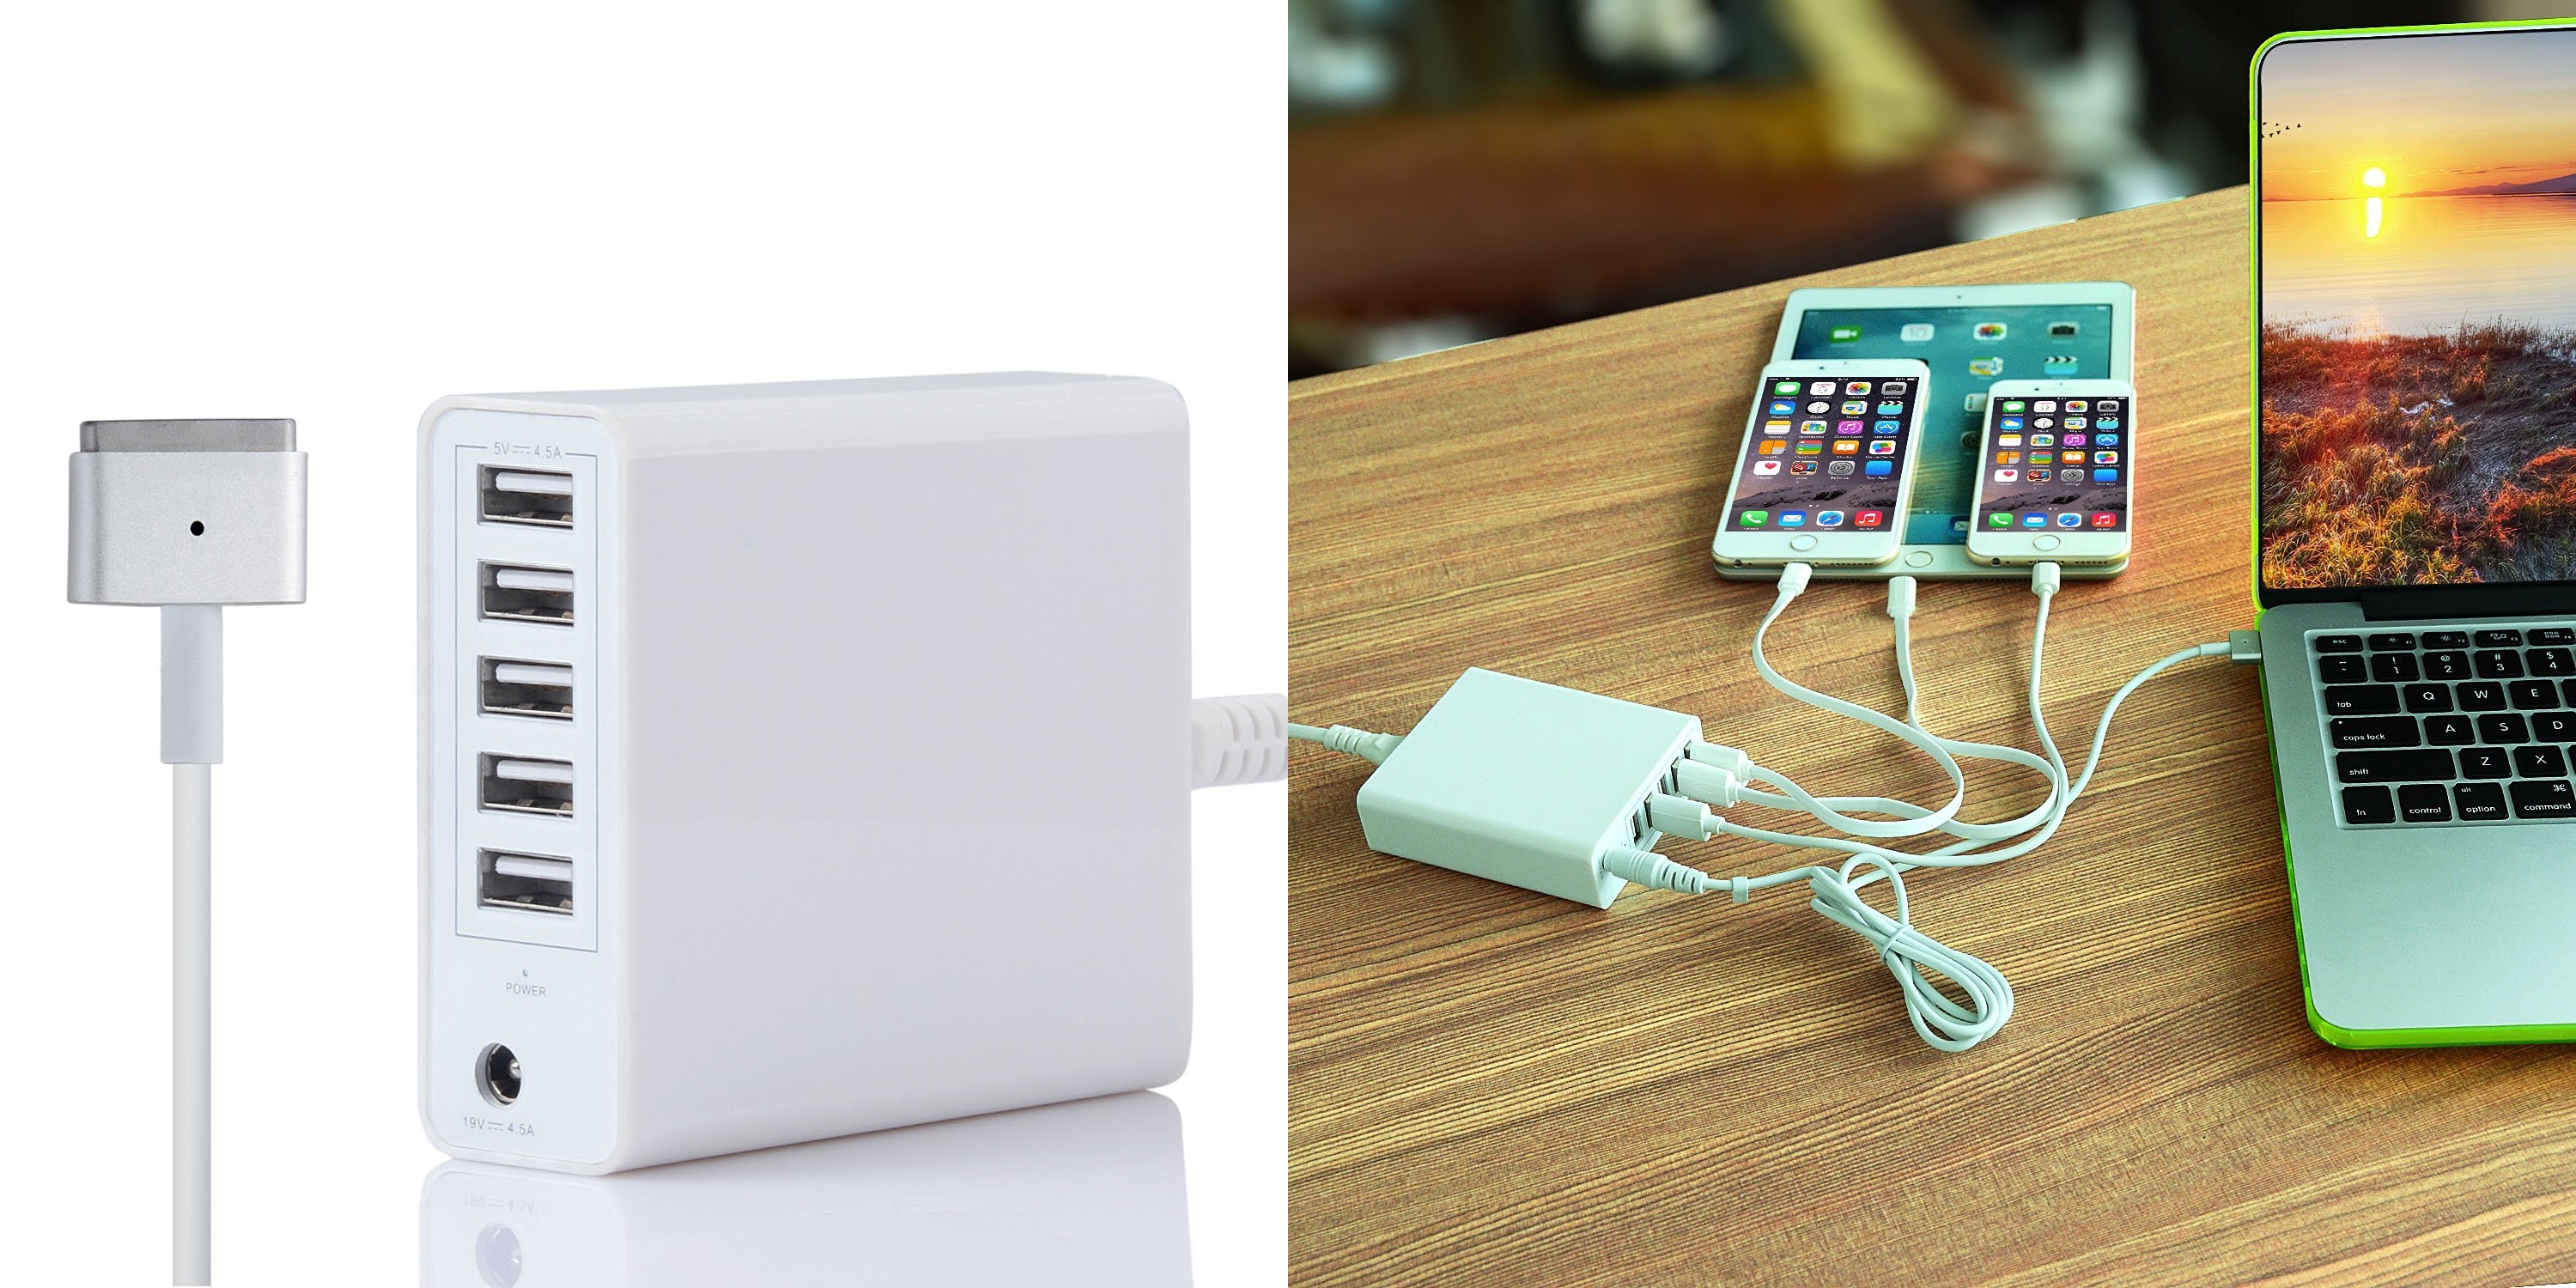 macbook pro magsafe 2 charger store